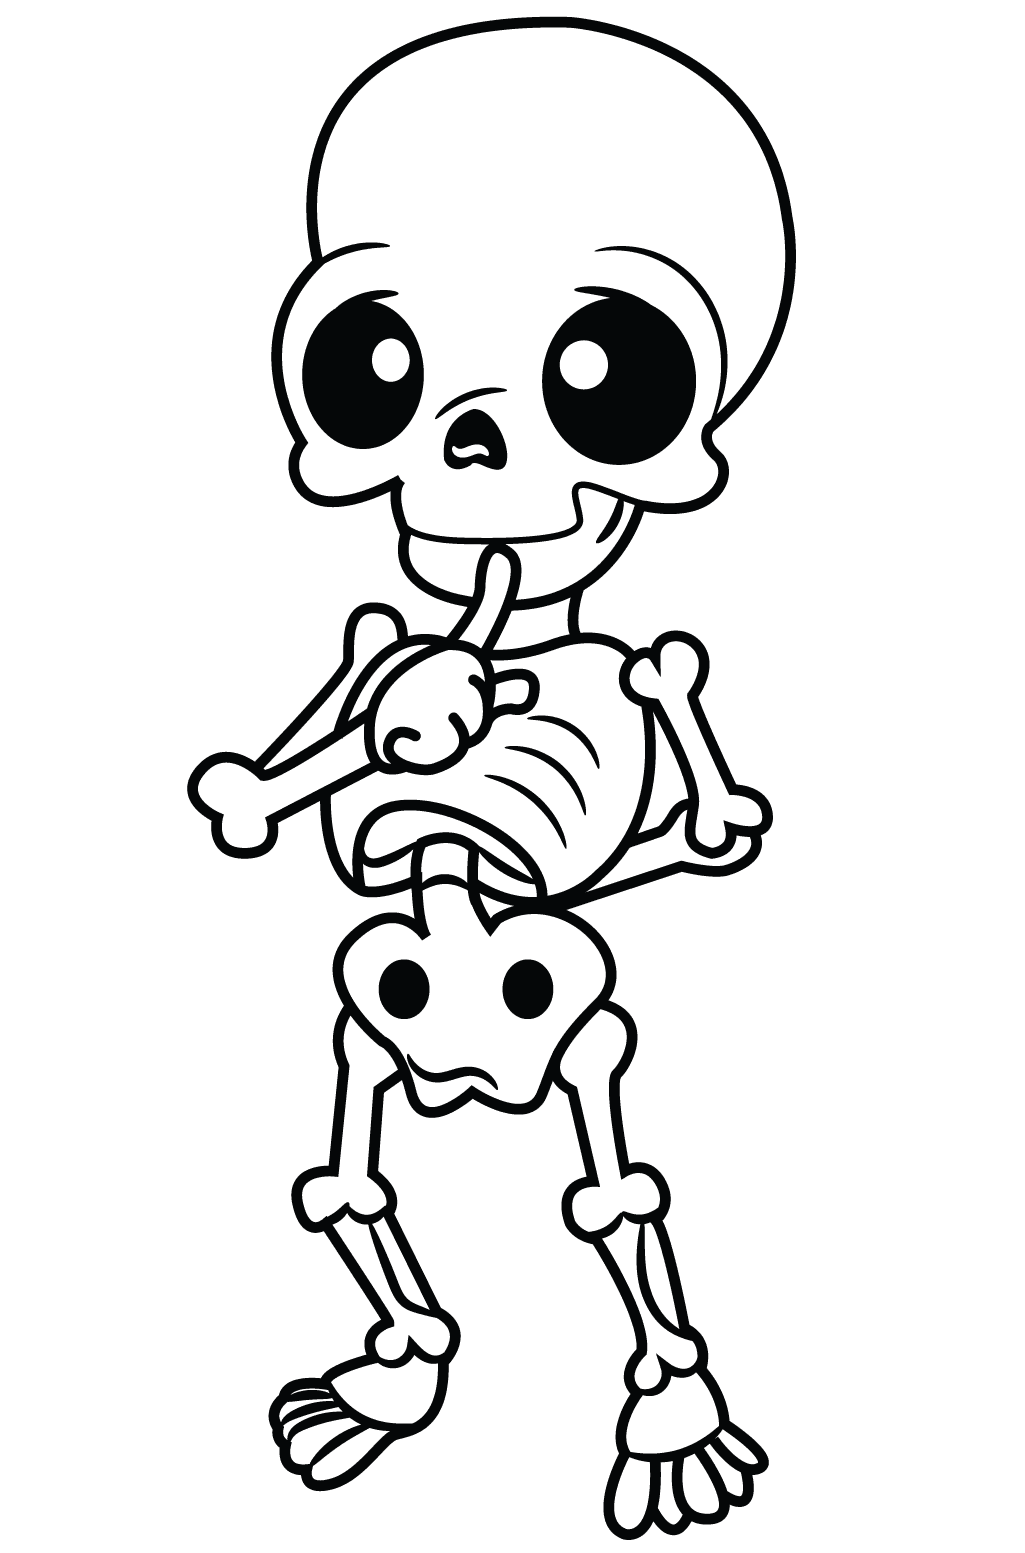 Cute Skeleton to Print Coloring Pages